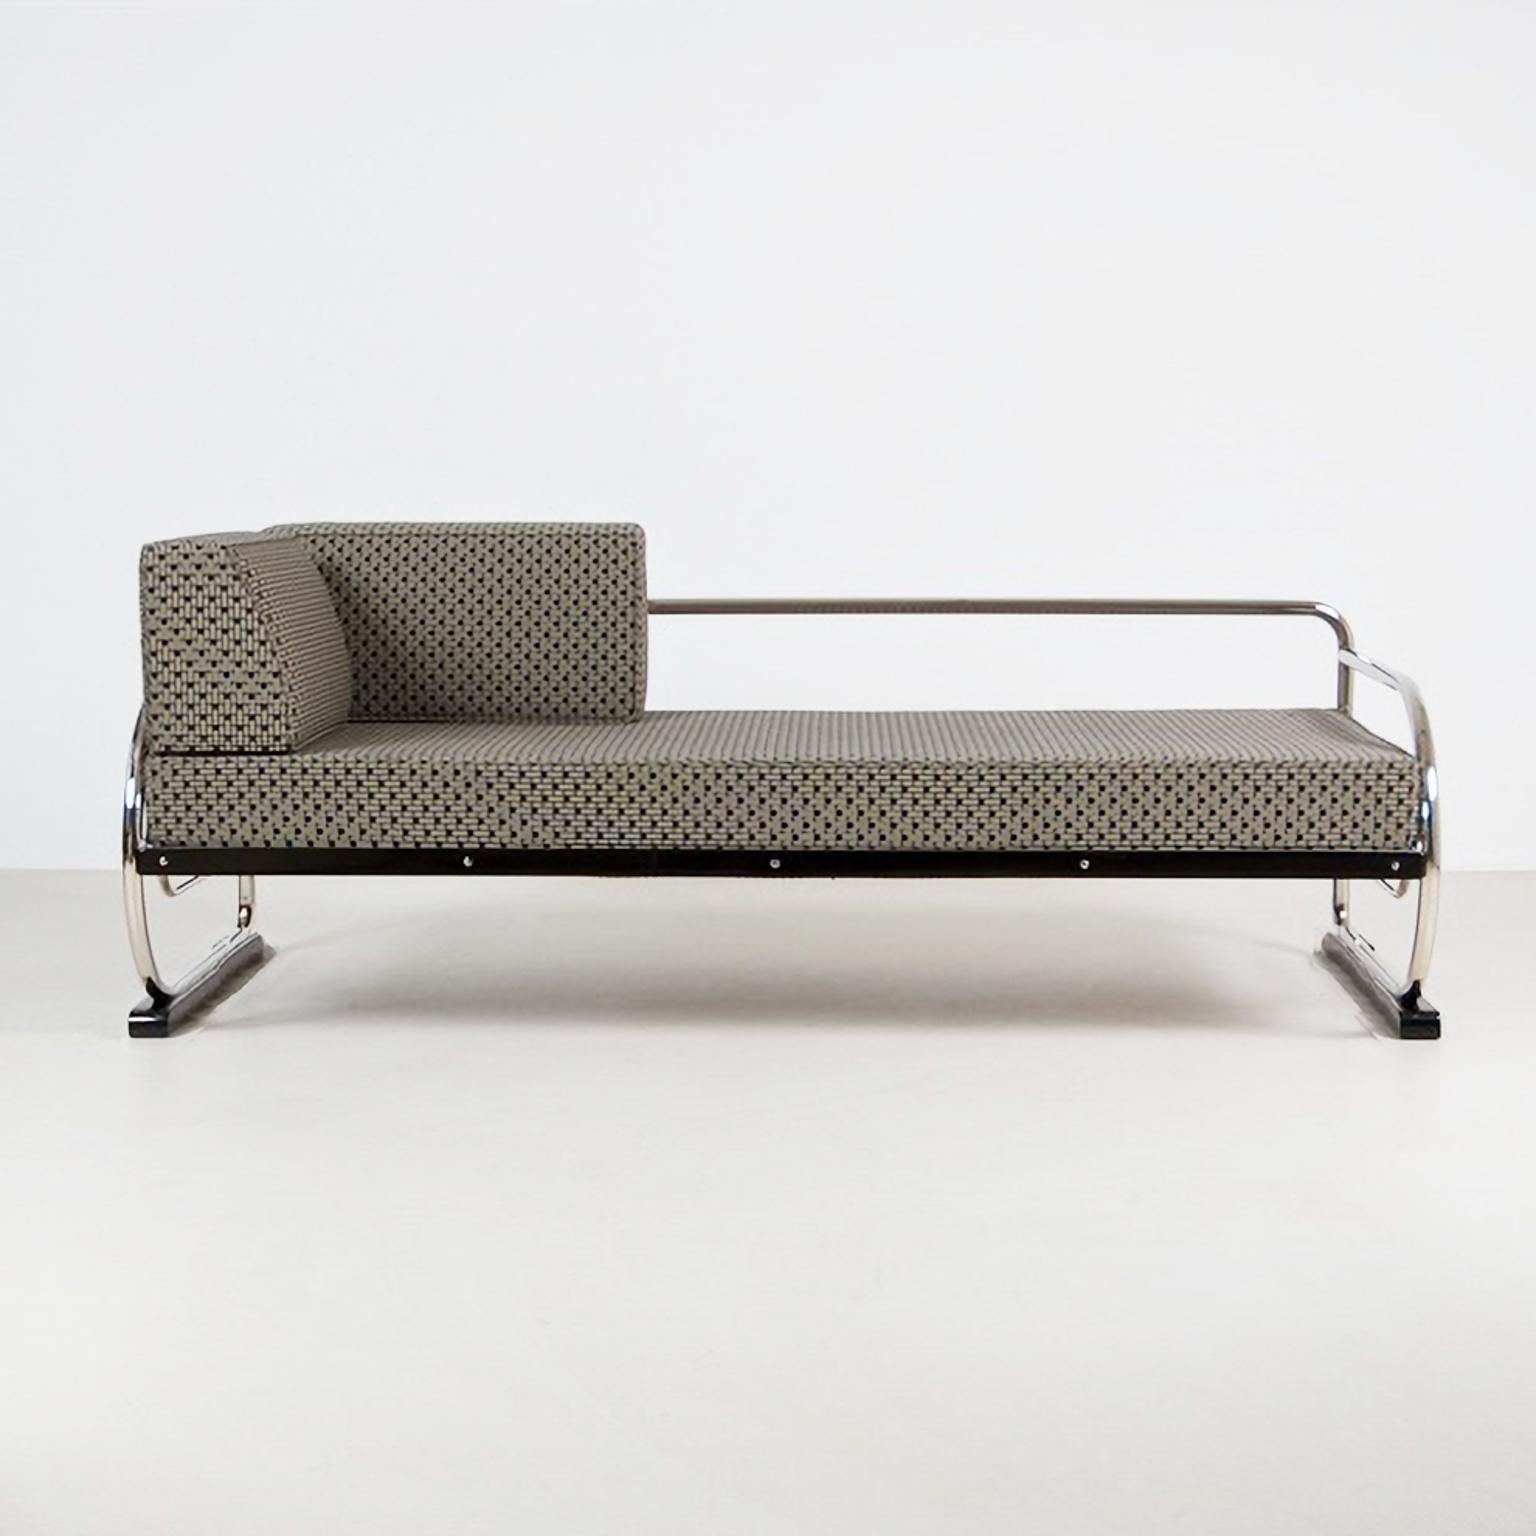 Art Deco Modernist Tubular Steel Couch/ Daybed, Chromed Metal, Fabric Upholstery, c. 1930 For Sale